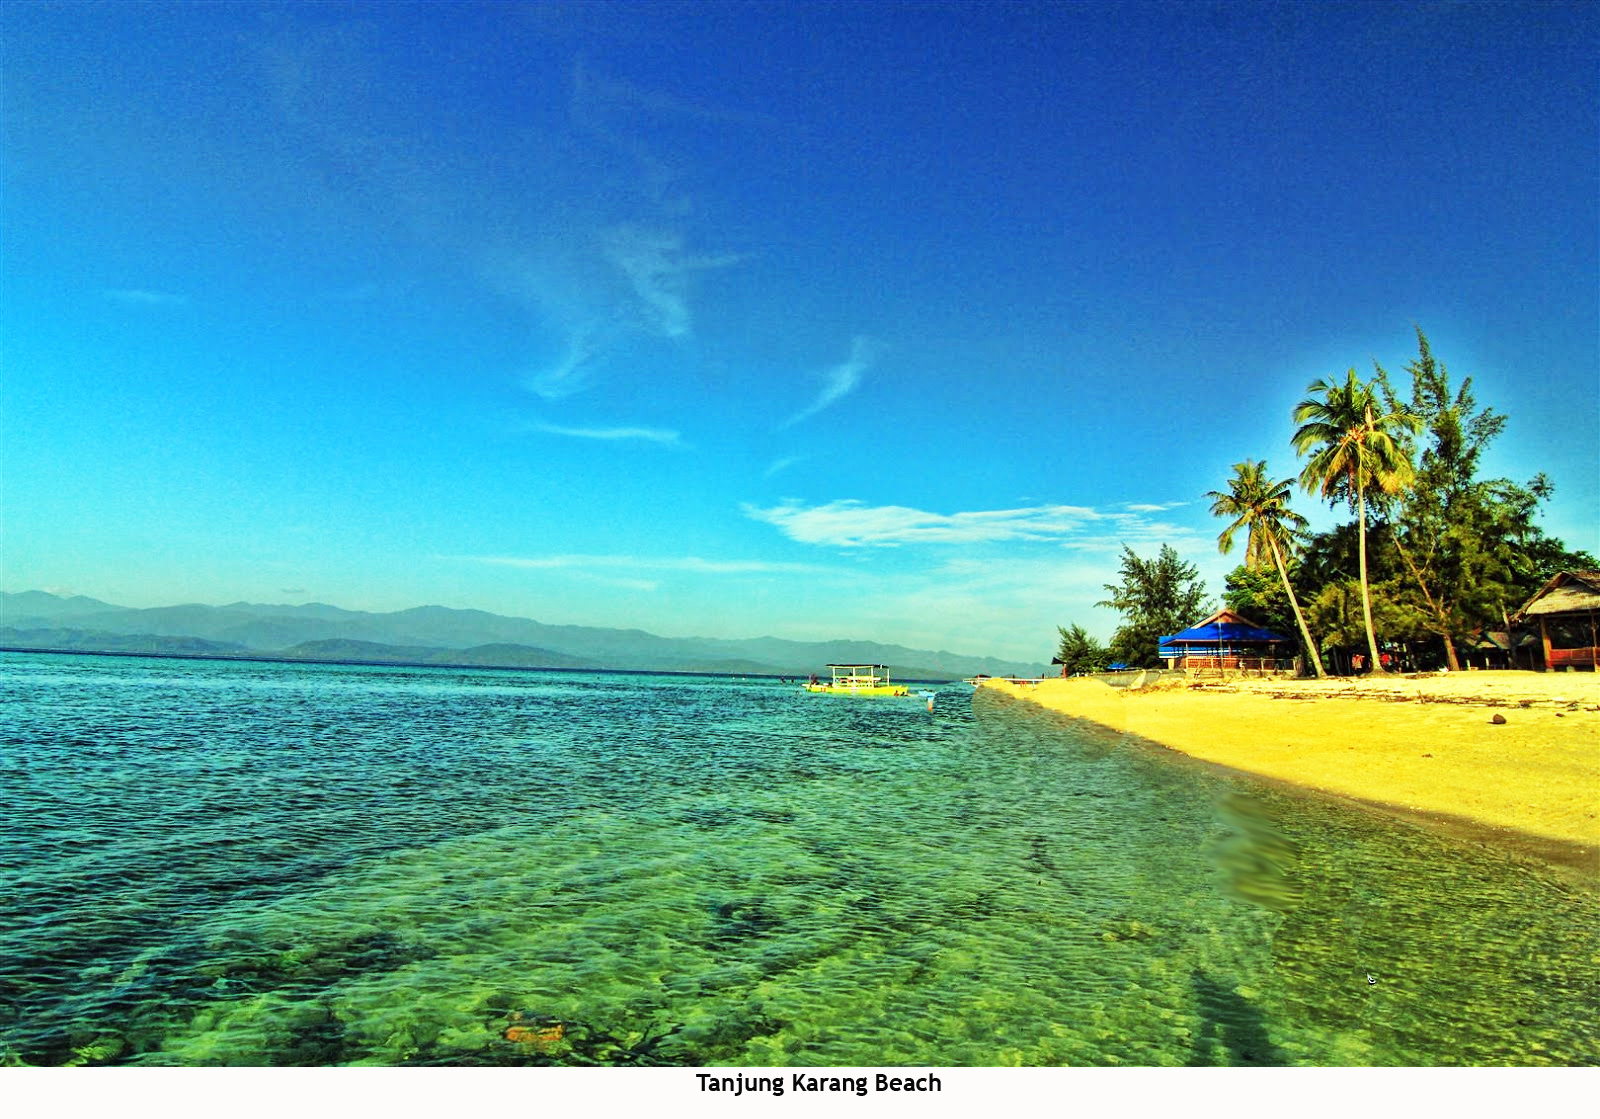 The Beauty Landscape of Indonesia: Beautiful Scenery from 